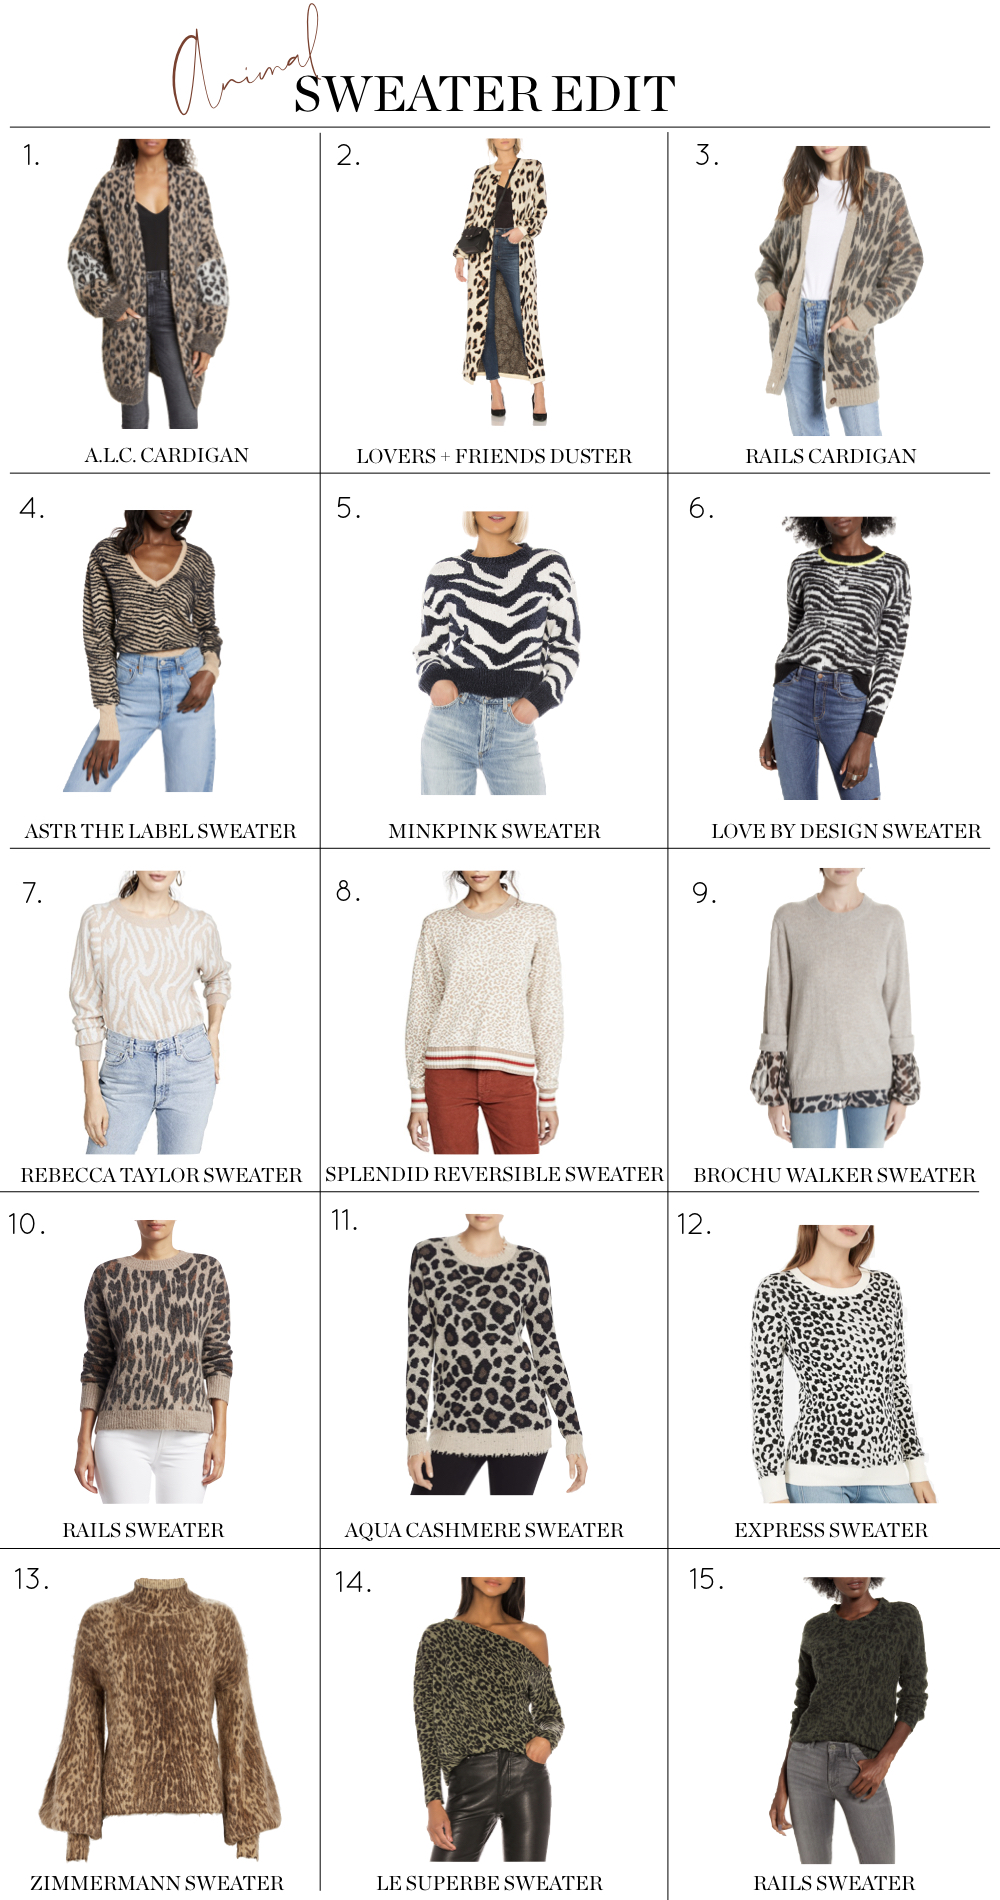 animal print sweaters for fall including leopard print sweaters, zebra print sweaters